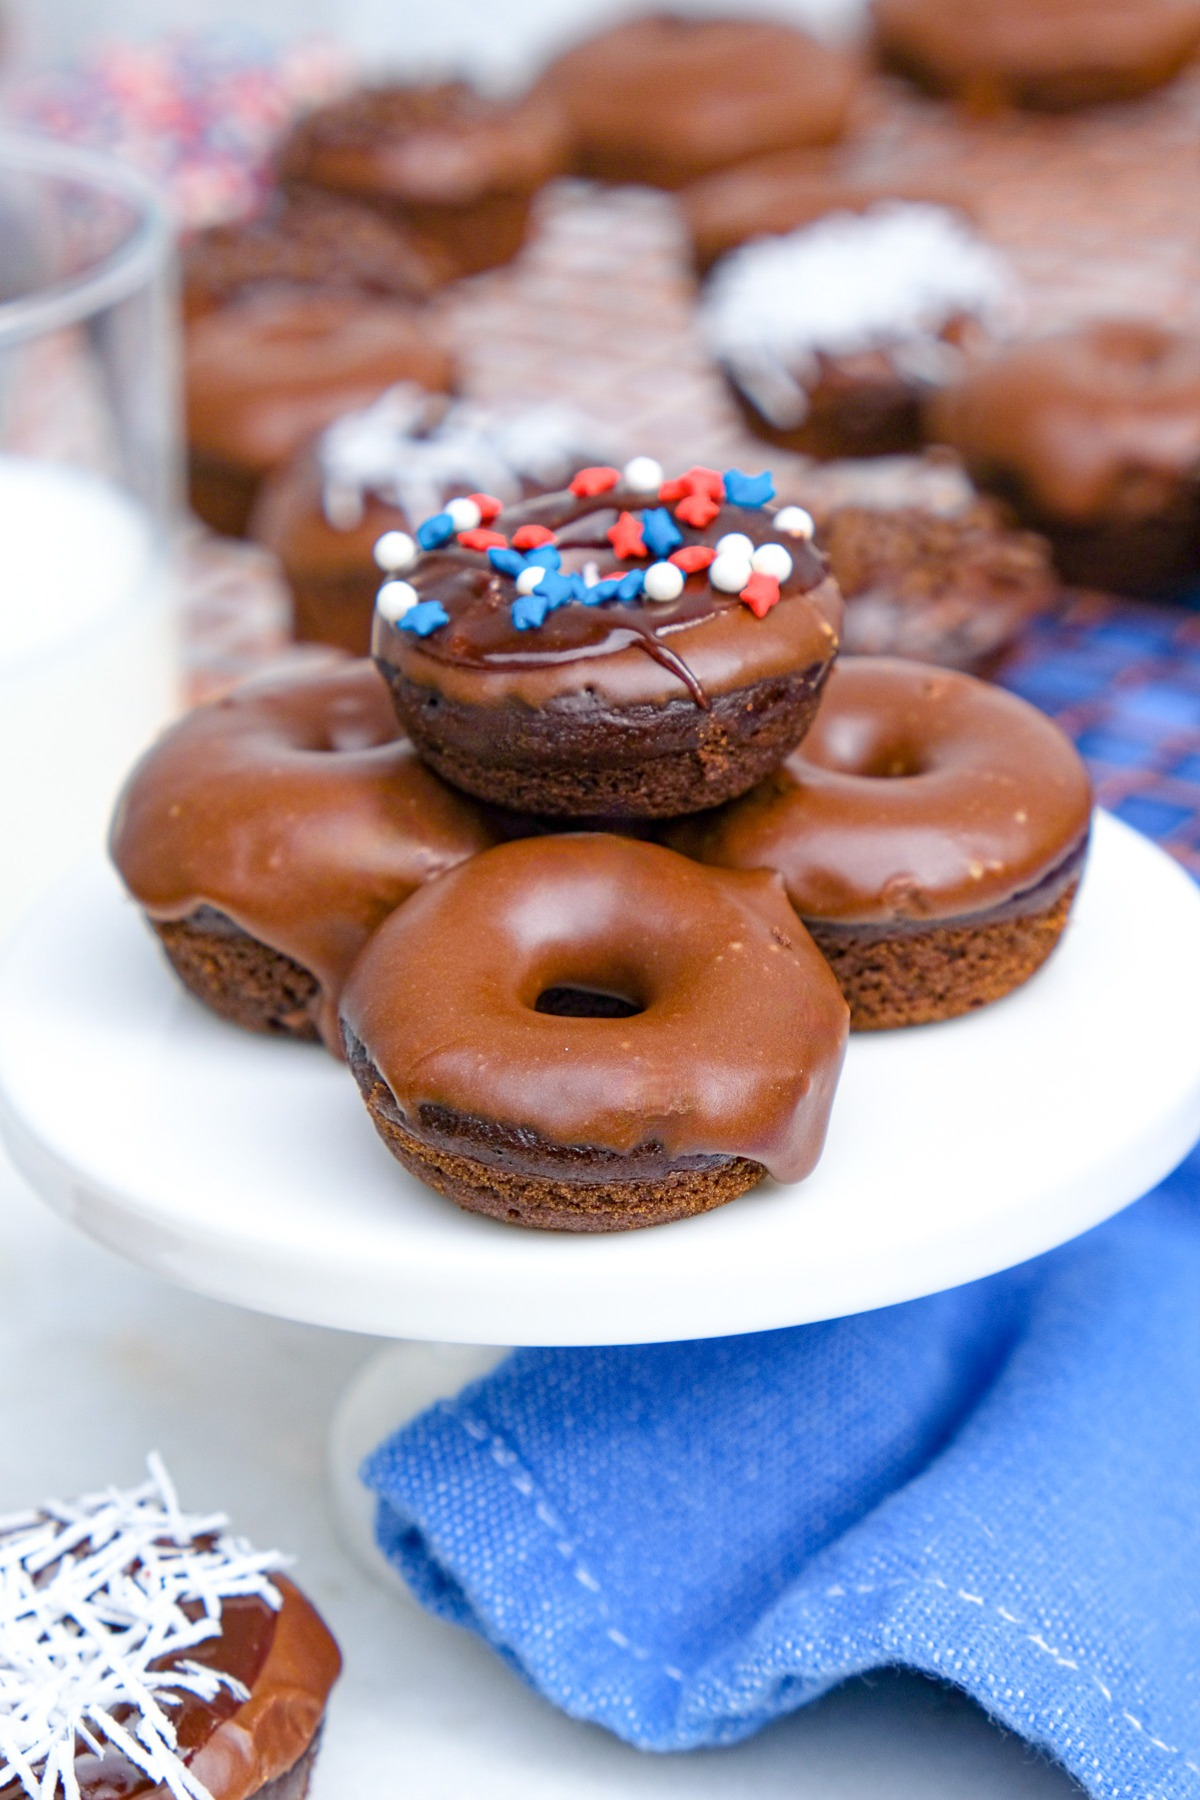 Baked Mini Chocolate Donuts Recipe - The Foodie Affair